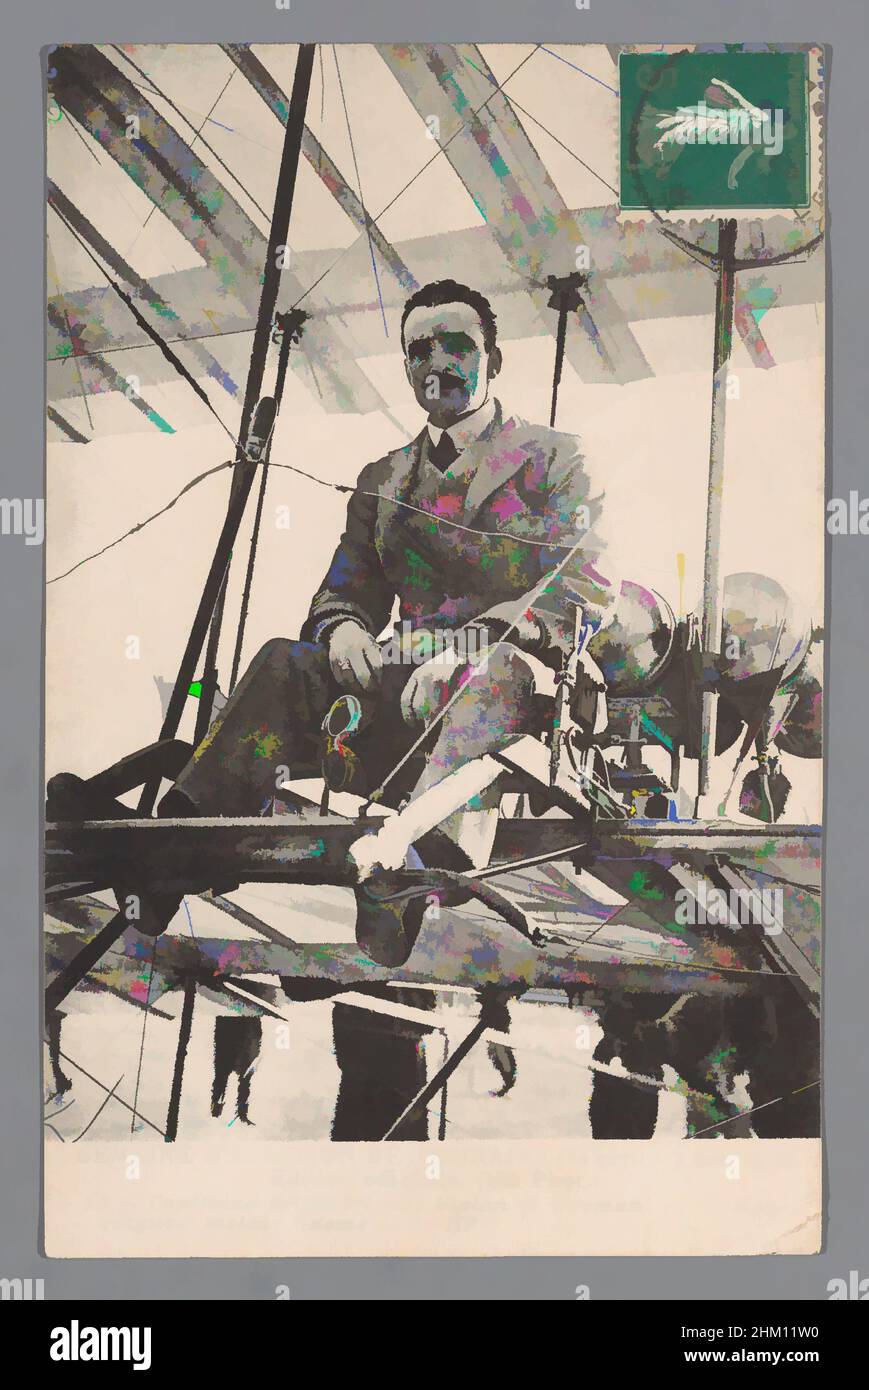 Art inspired by Portrait of Bertram Dickson on Henri Farman's plane, Capitaine Dickson, sur biplan H. Farman 10 m. d'envergure; moteur Gnome de 50 HP, ND, Reims, c. 30-Apr-1910 - before 4-Aug-1910, paper, collotype, height 135 mm × width 88 mm, Classic works modernized by Artotop with a splash of modernity. Shapes, color and value, eye-catching visual impact on art. Emotions through freedom of artworks in a contemporary way. A timeless message pursuing a wildly creative new direction. Artists turning to the digital medium and creating the Artotop NFT Stock Photo